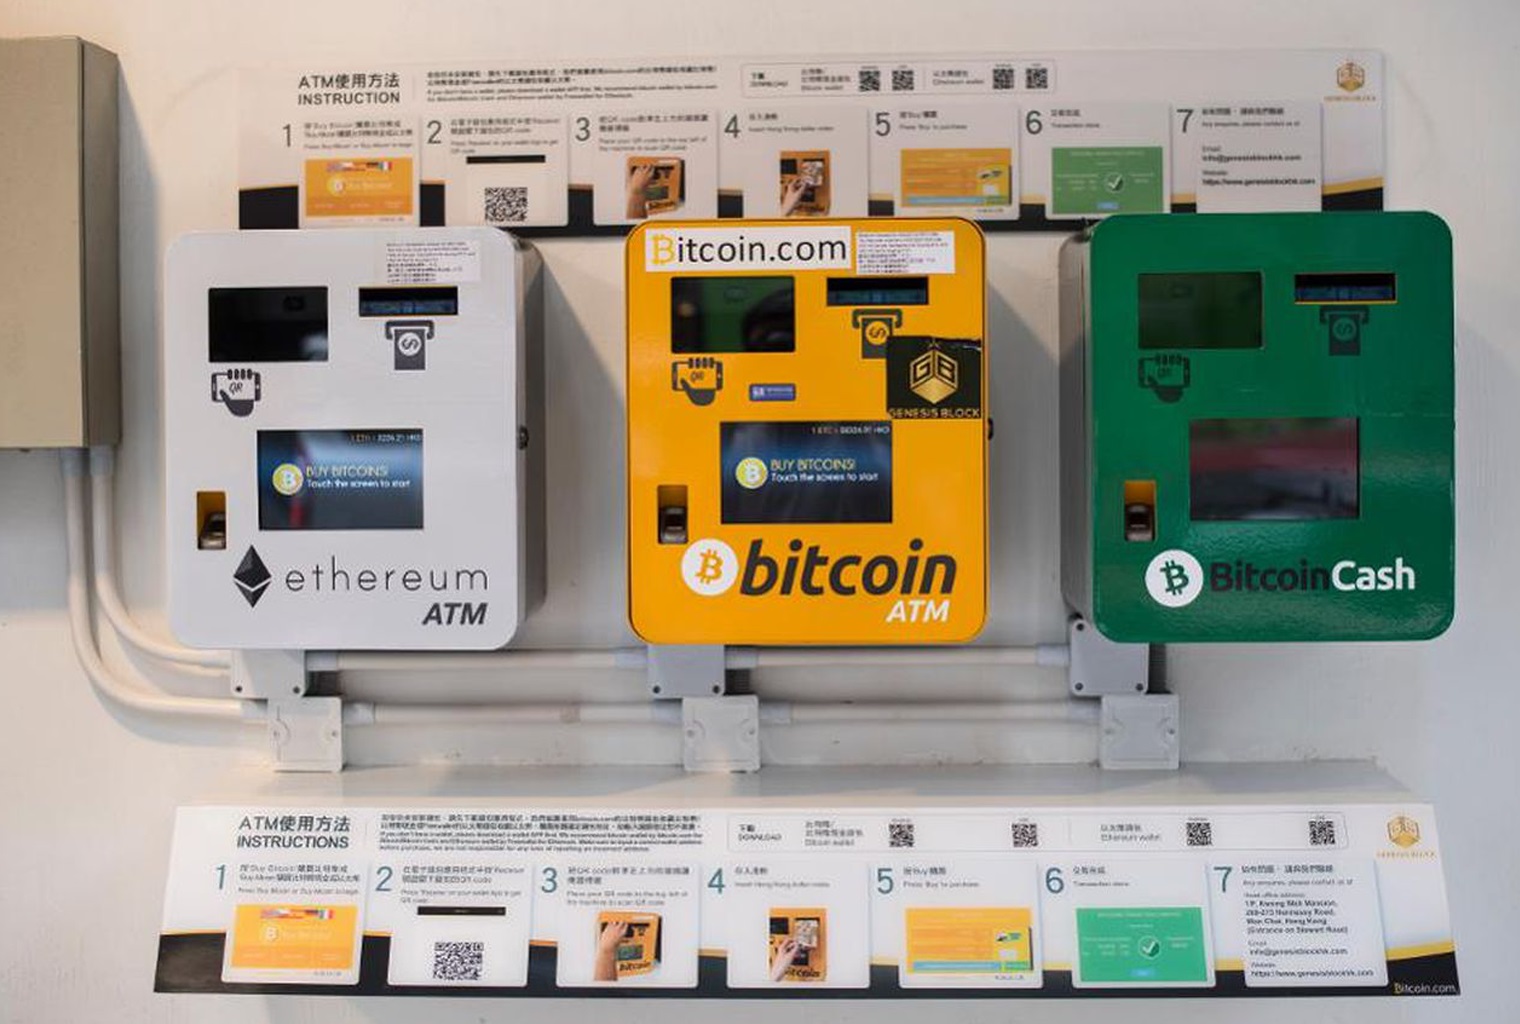 Bitcoin consumes more electricity per year than the whole of Argentina